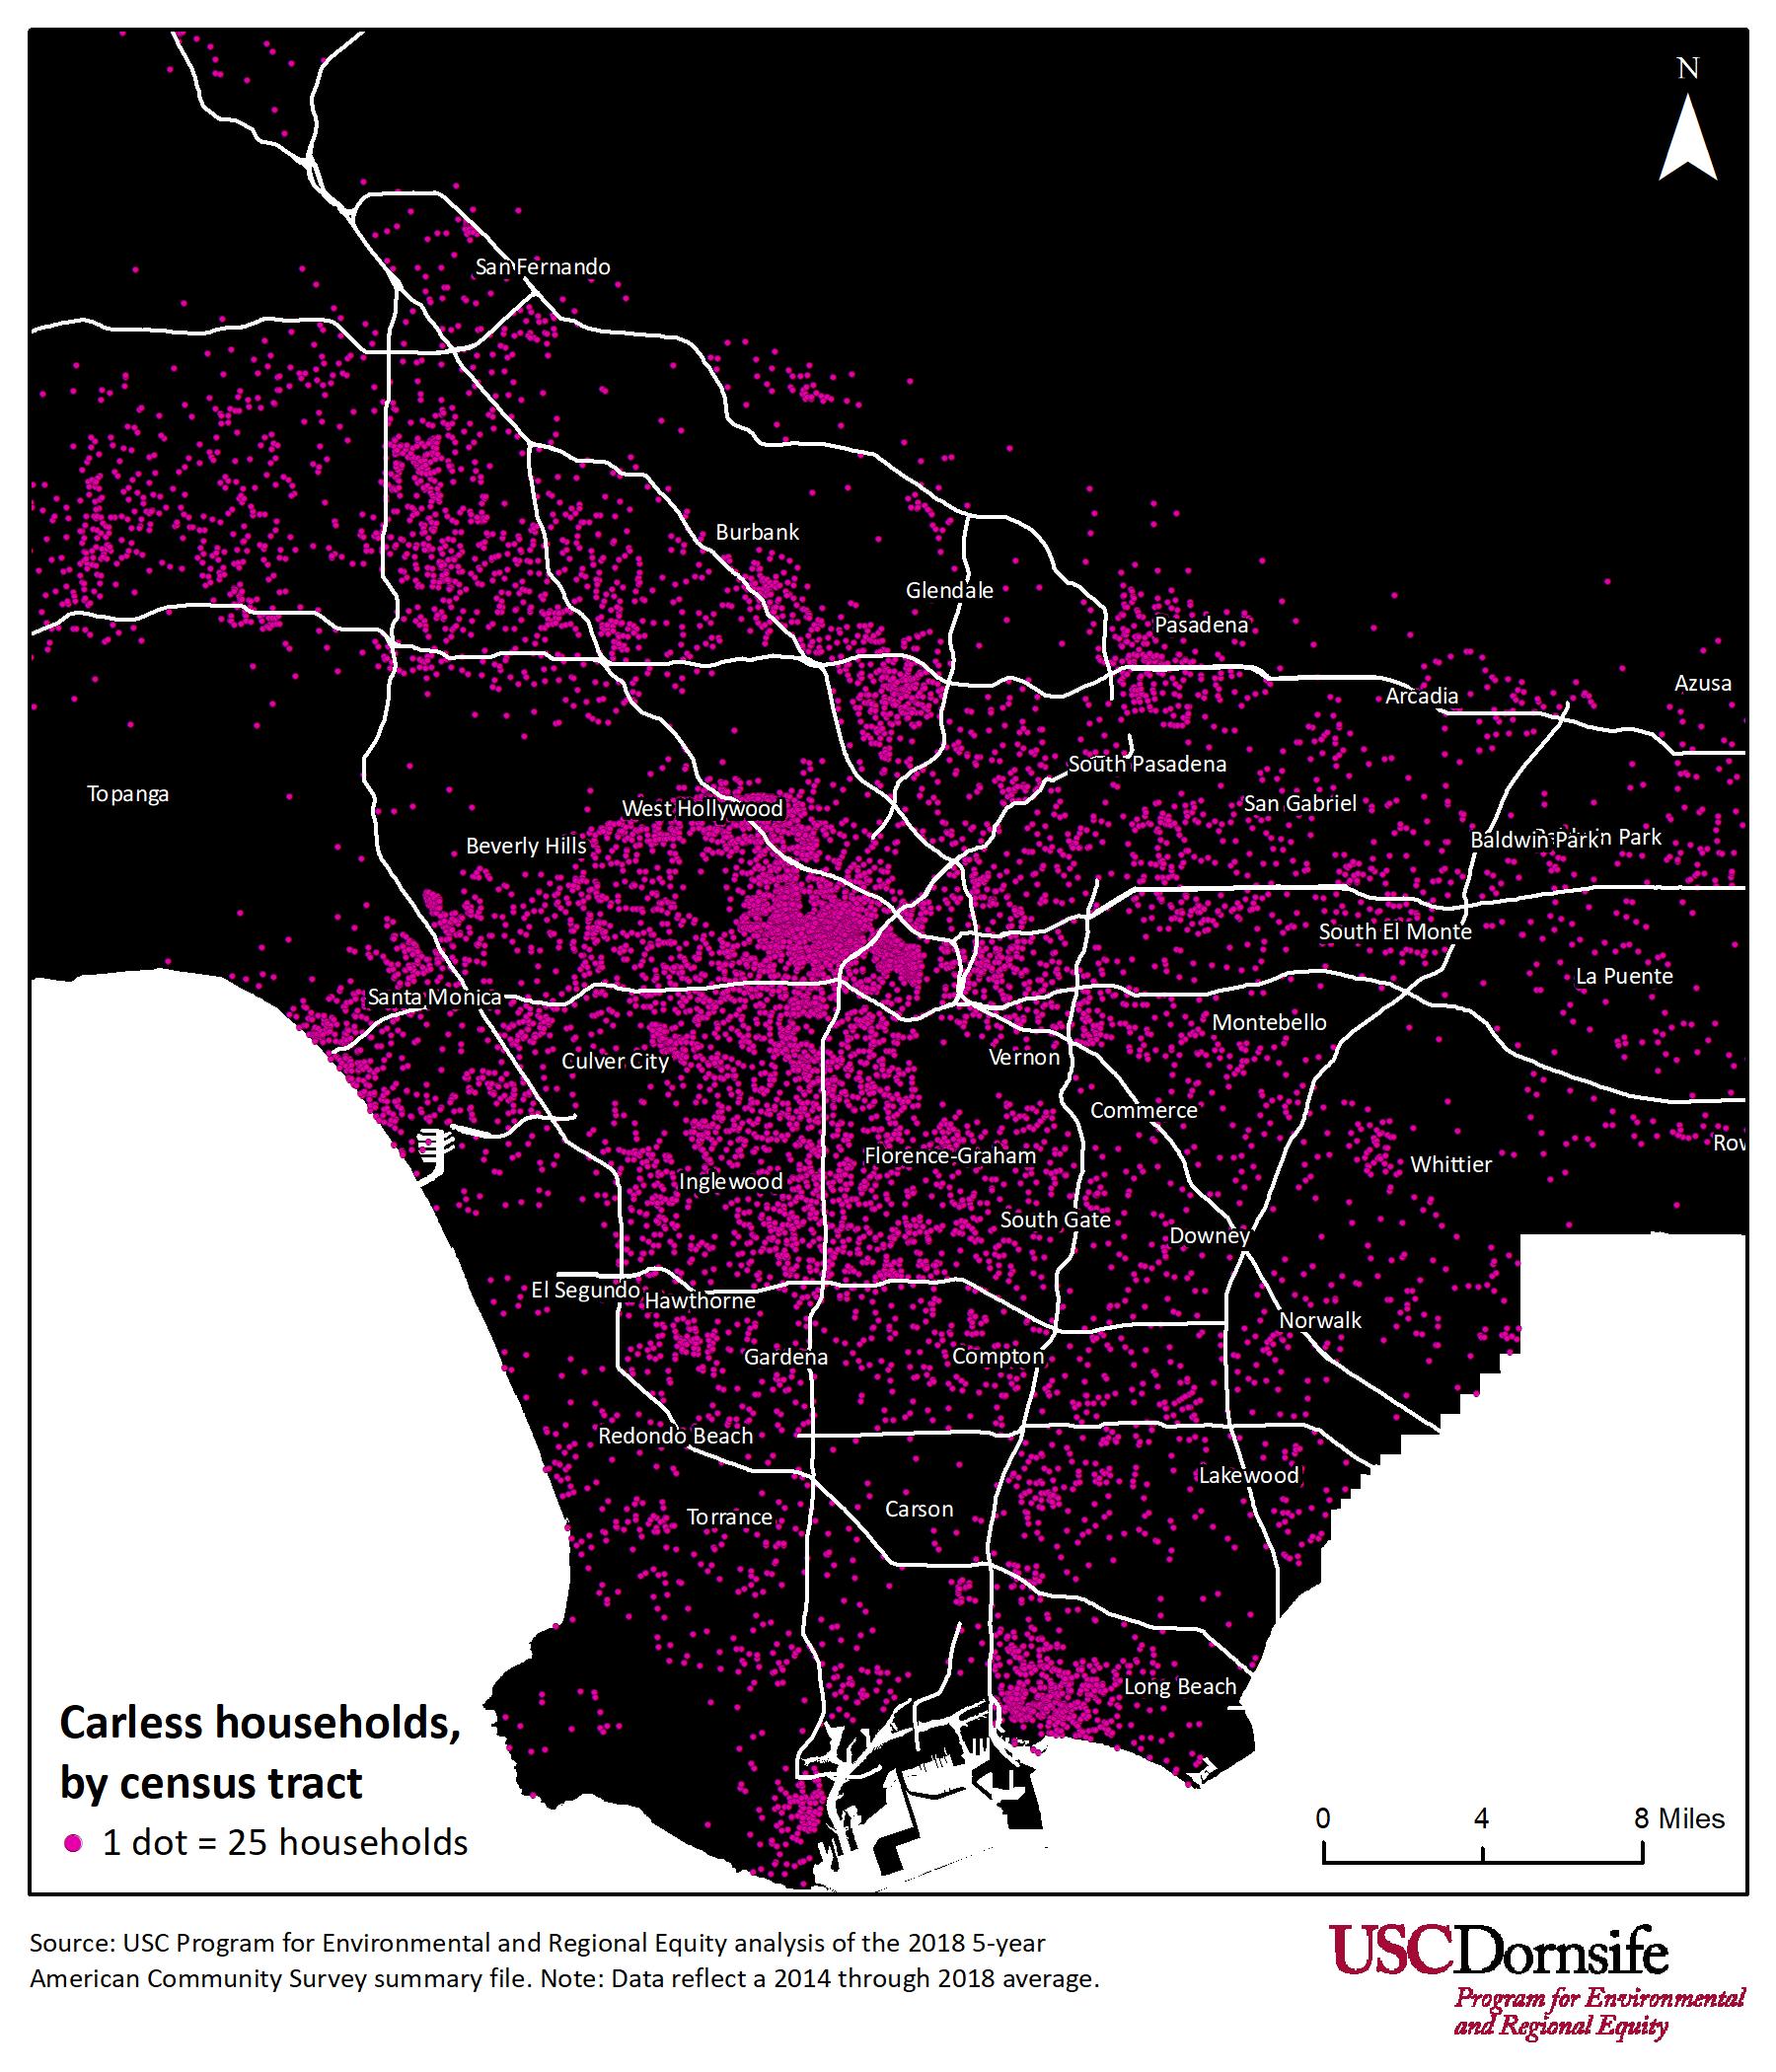 Image showing distribution of carless households in L.A. County